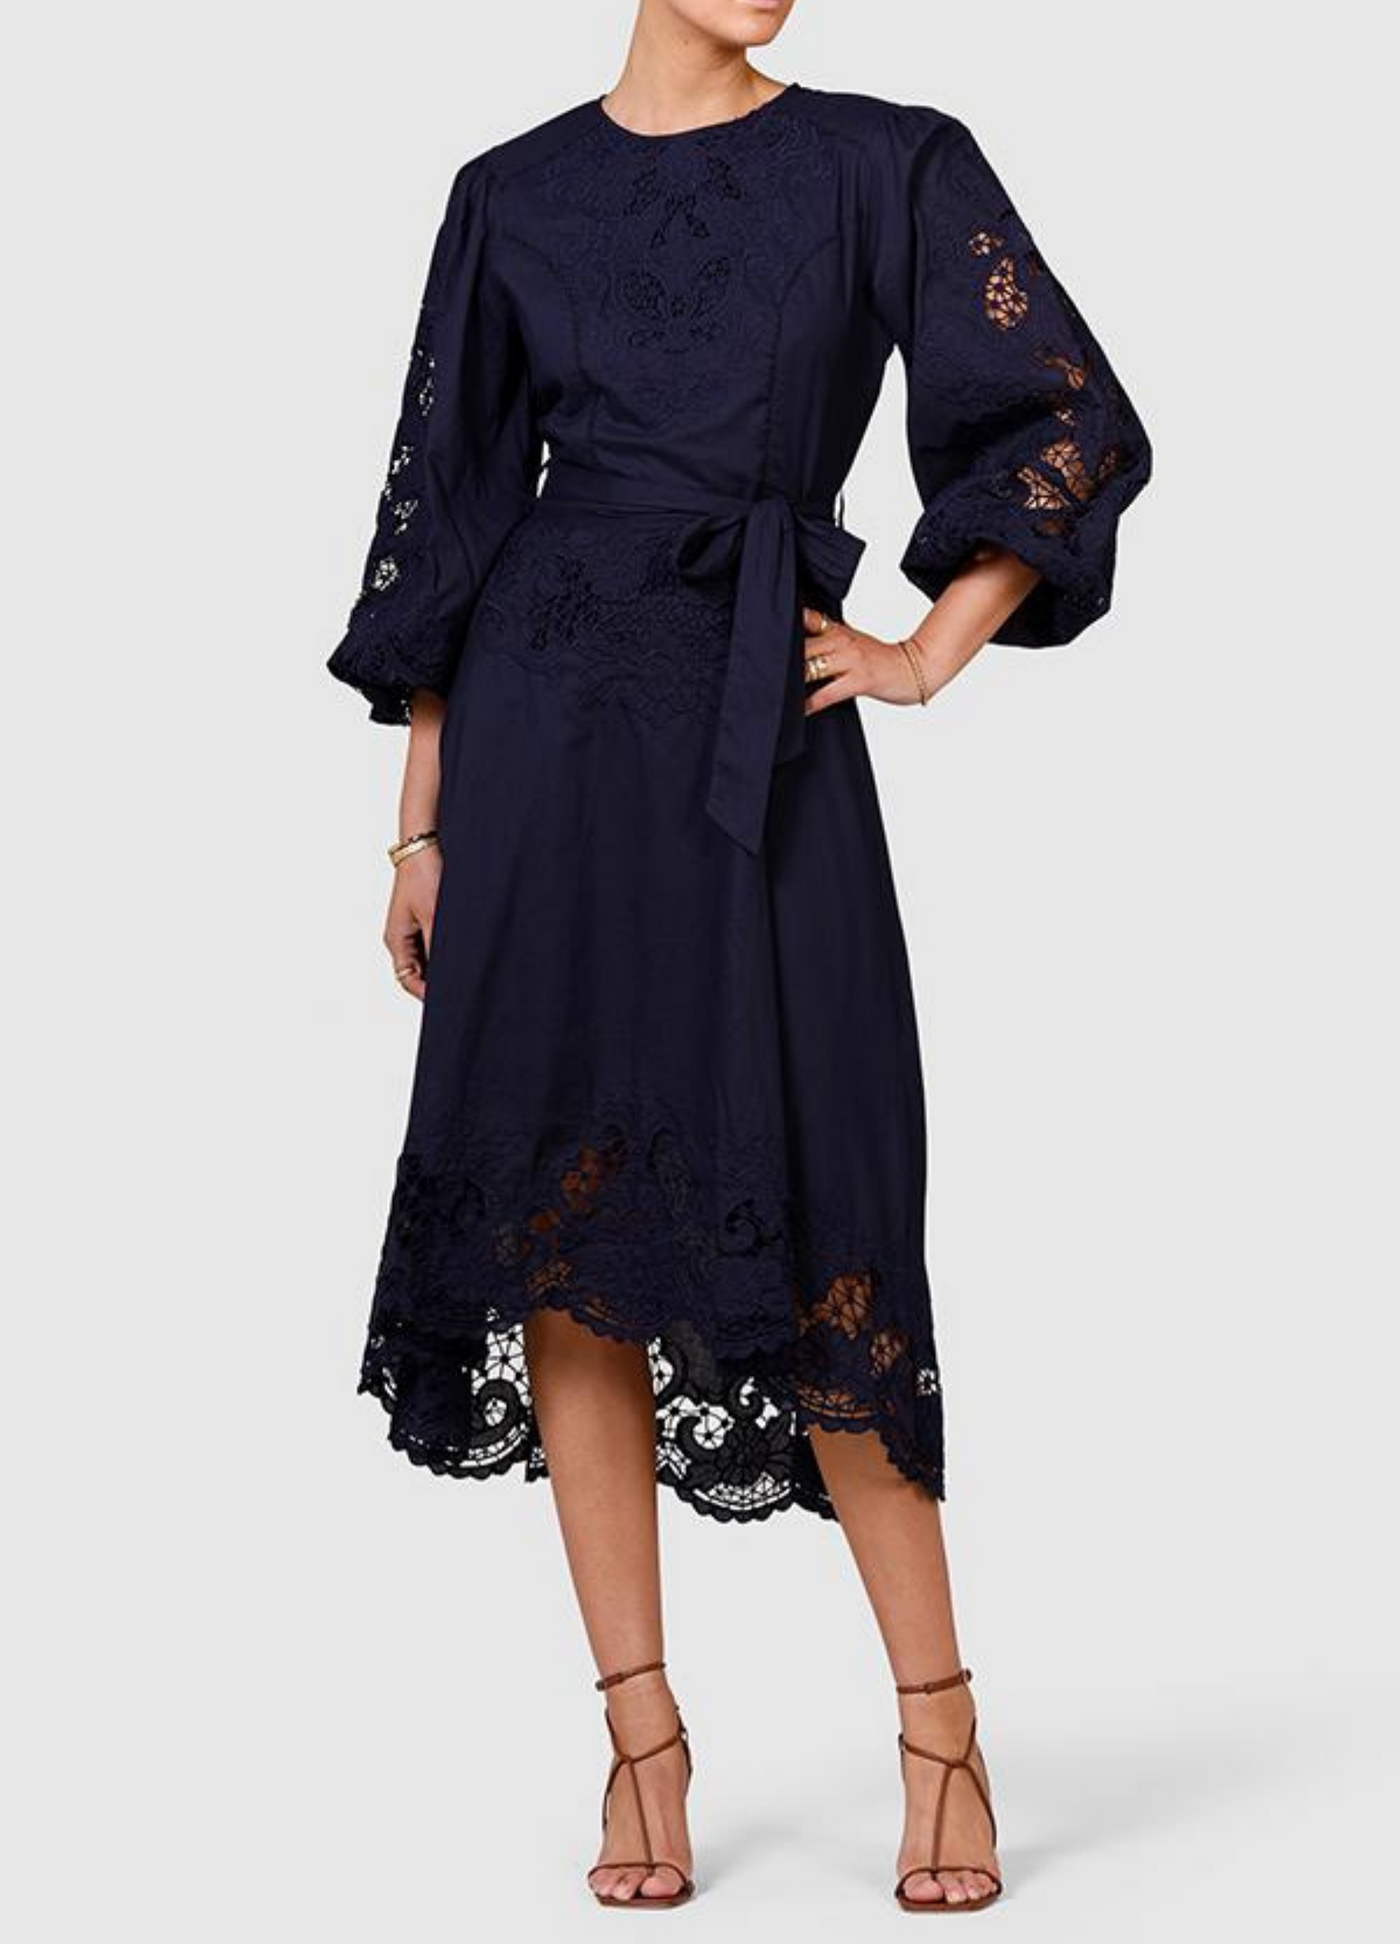 Model wearing navy blue midi dress from ministry of style